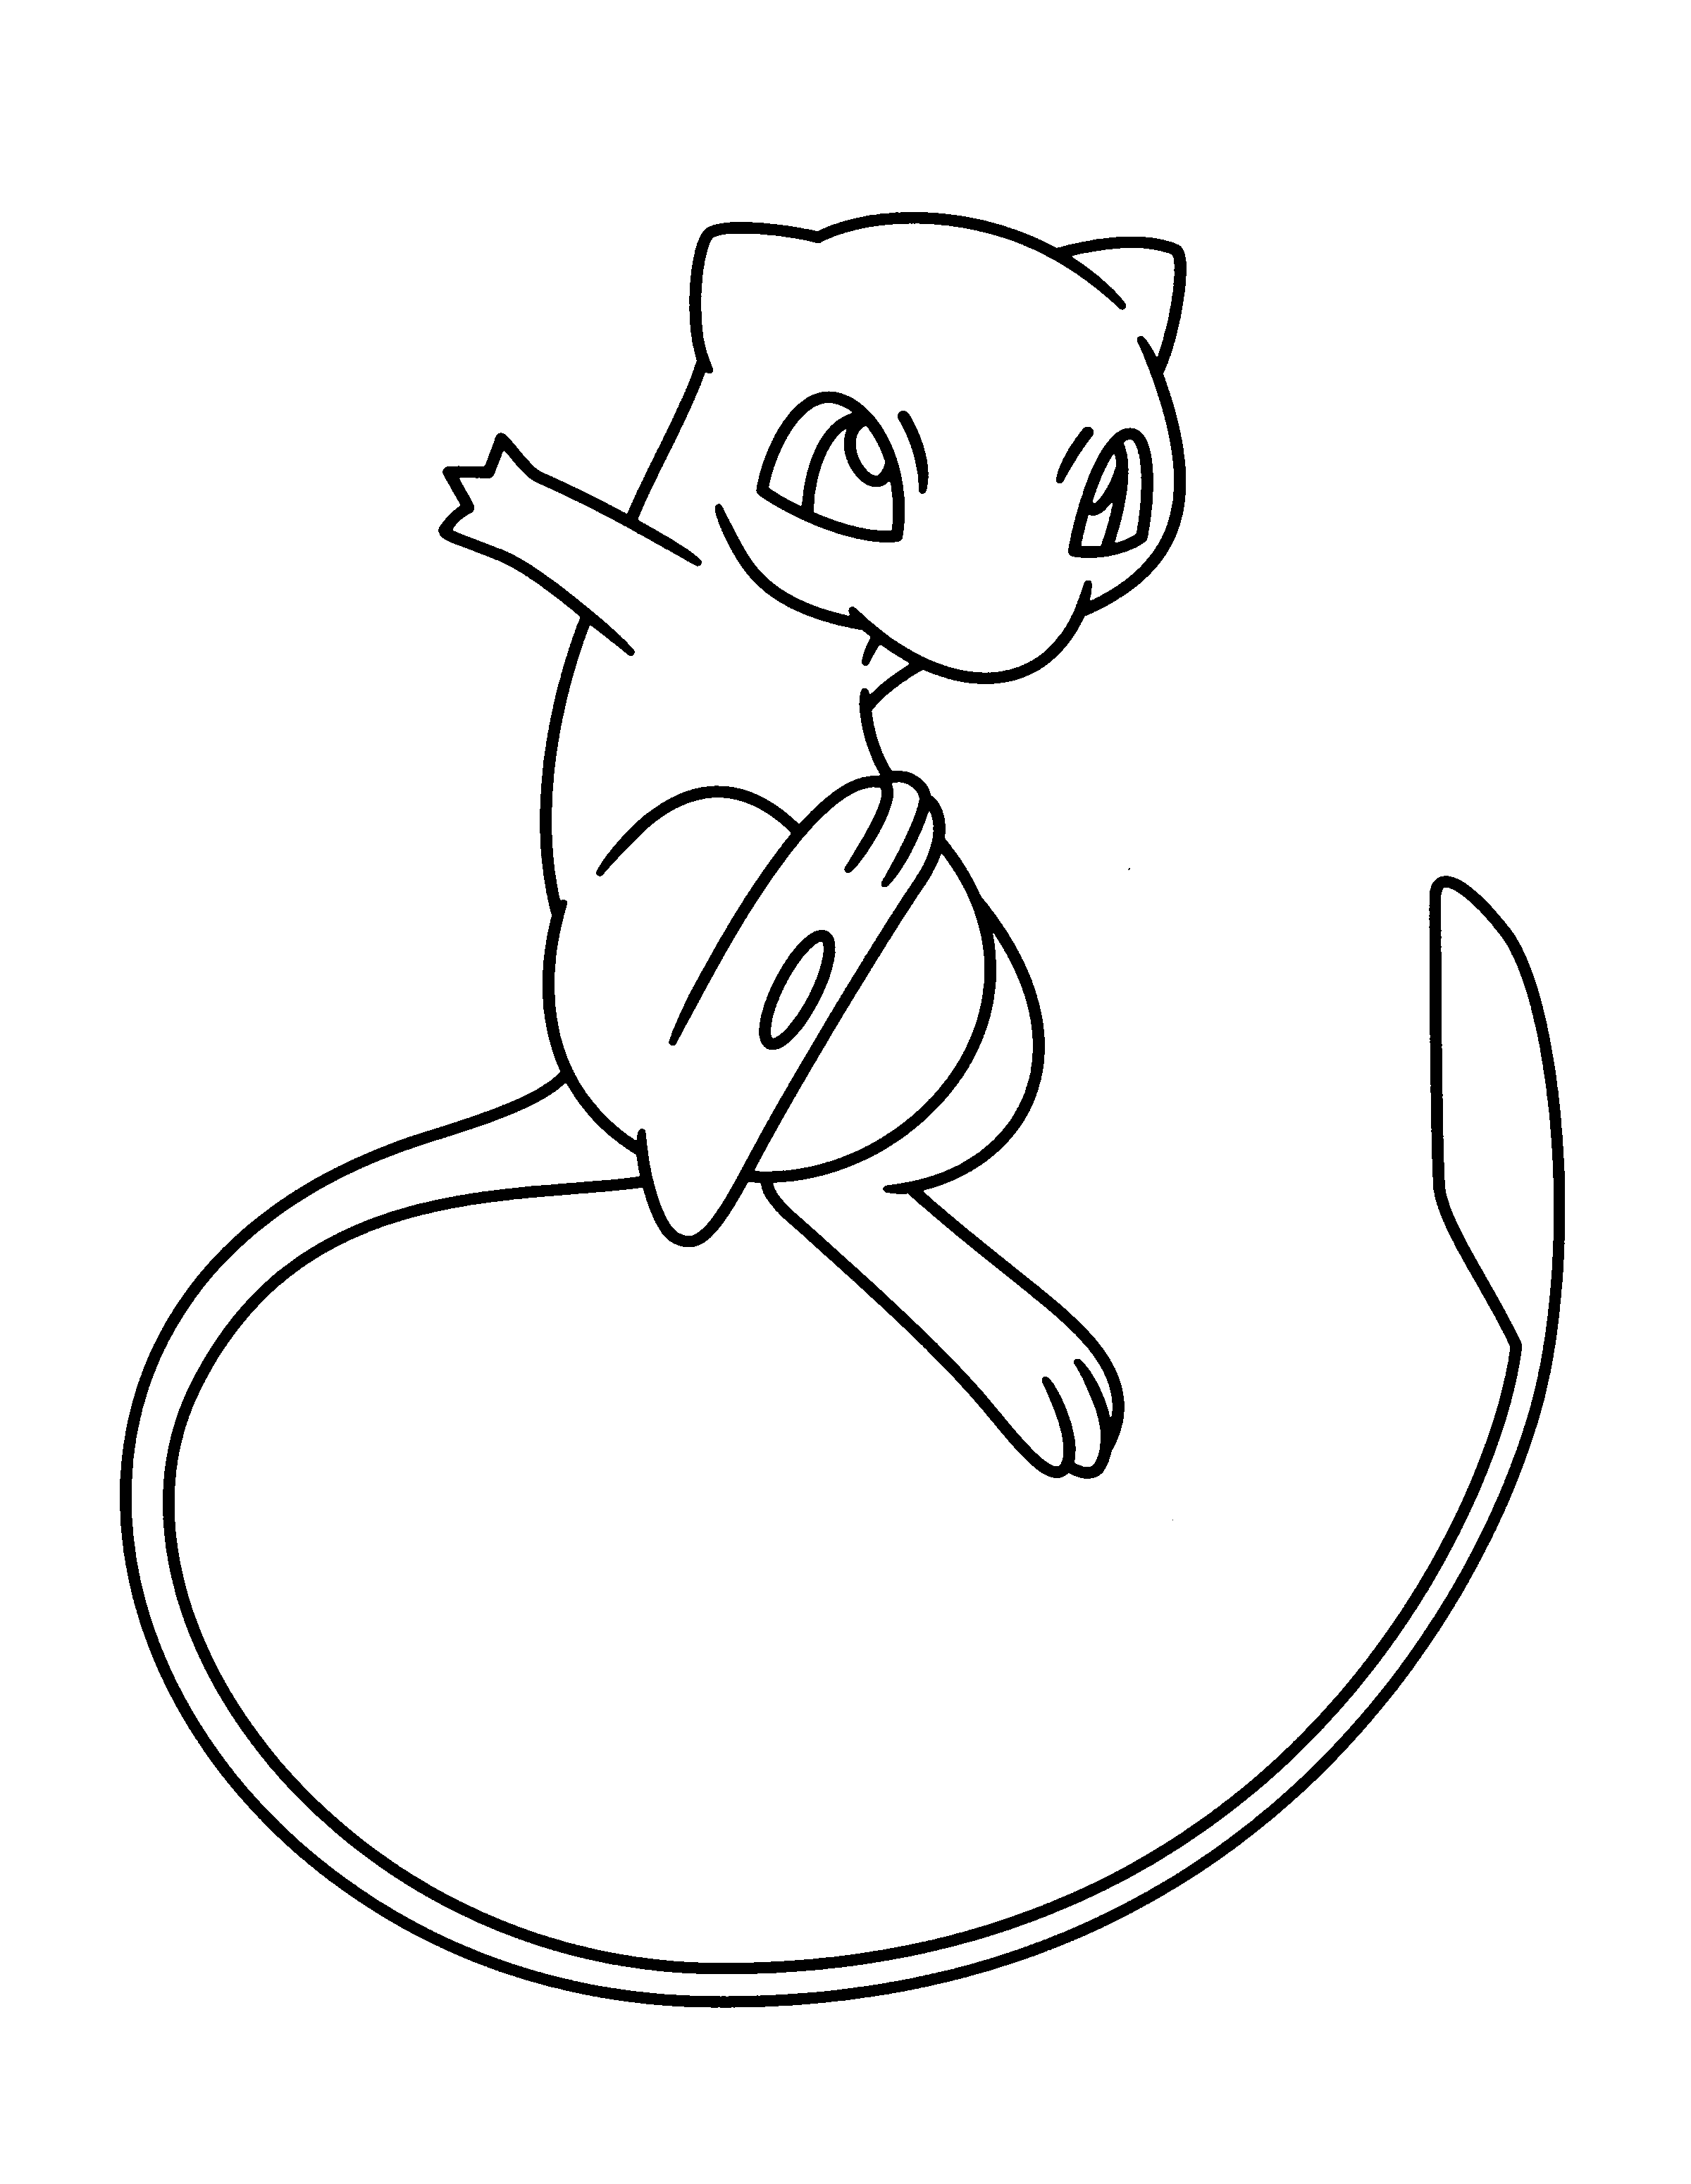 253 Unicorn Mew Pokemon Coloring Pages for Kindergarten